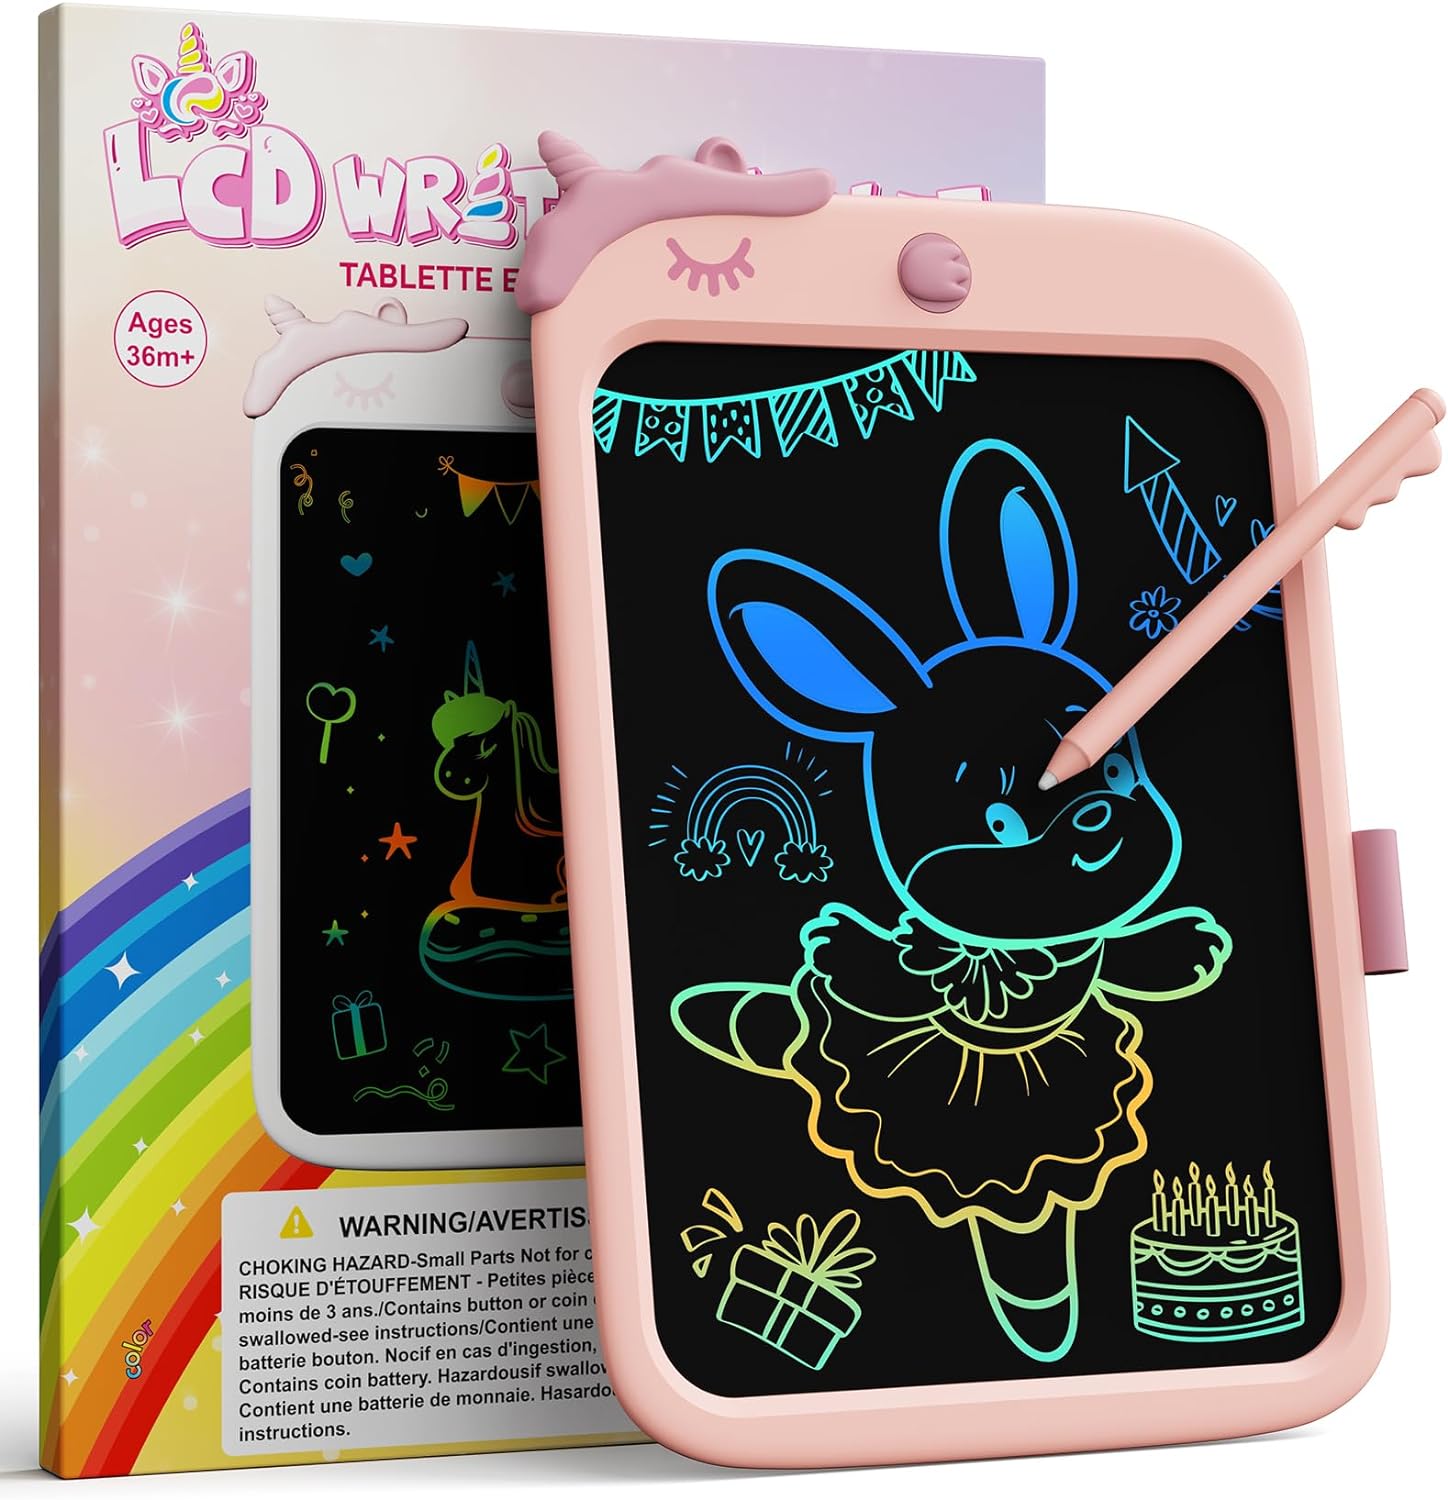 LCD Writing Tablet Girls Toy, 10Inch Unicorn Drawing Pads, Doodle Board Drawing Tablet for Kids, Erasable Writing Tablet, Educational Toddler Toys, Birthday Gifts for 3 4 5 6 Years Old Kids Toys, Pink